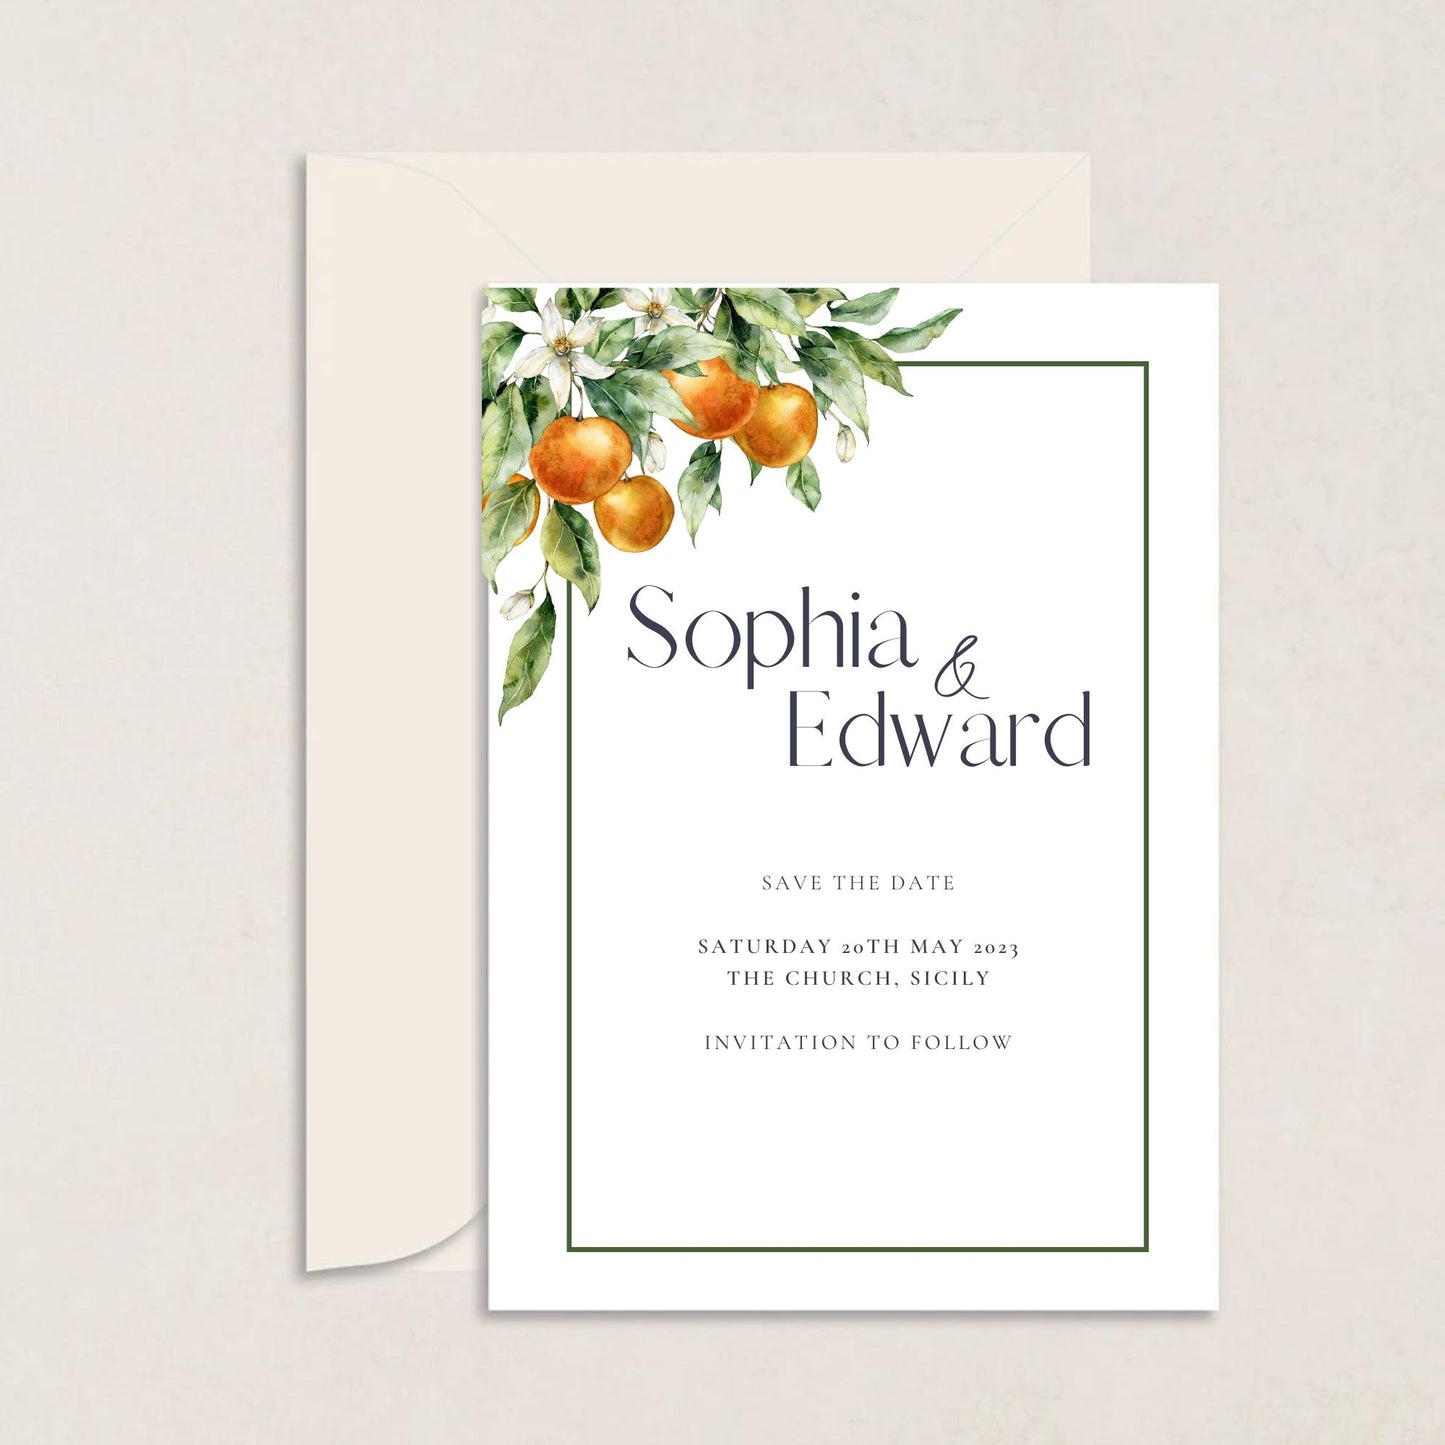 SOPHIA Wedding Save the Date - Wedding Invitations available at The Ivy Collection | Luxury Wedding Stationery